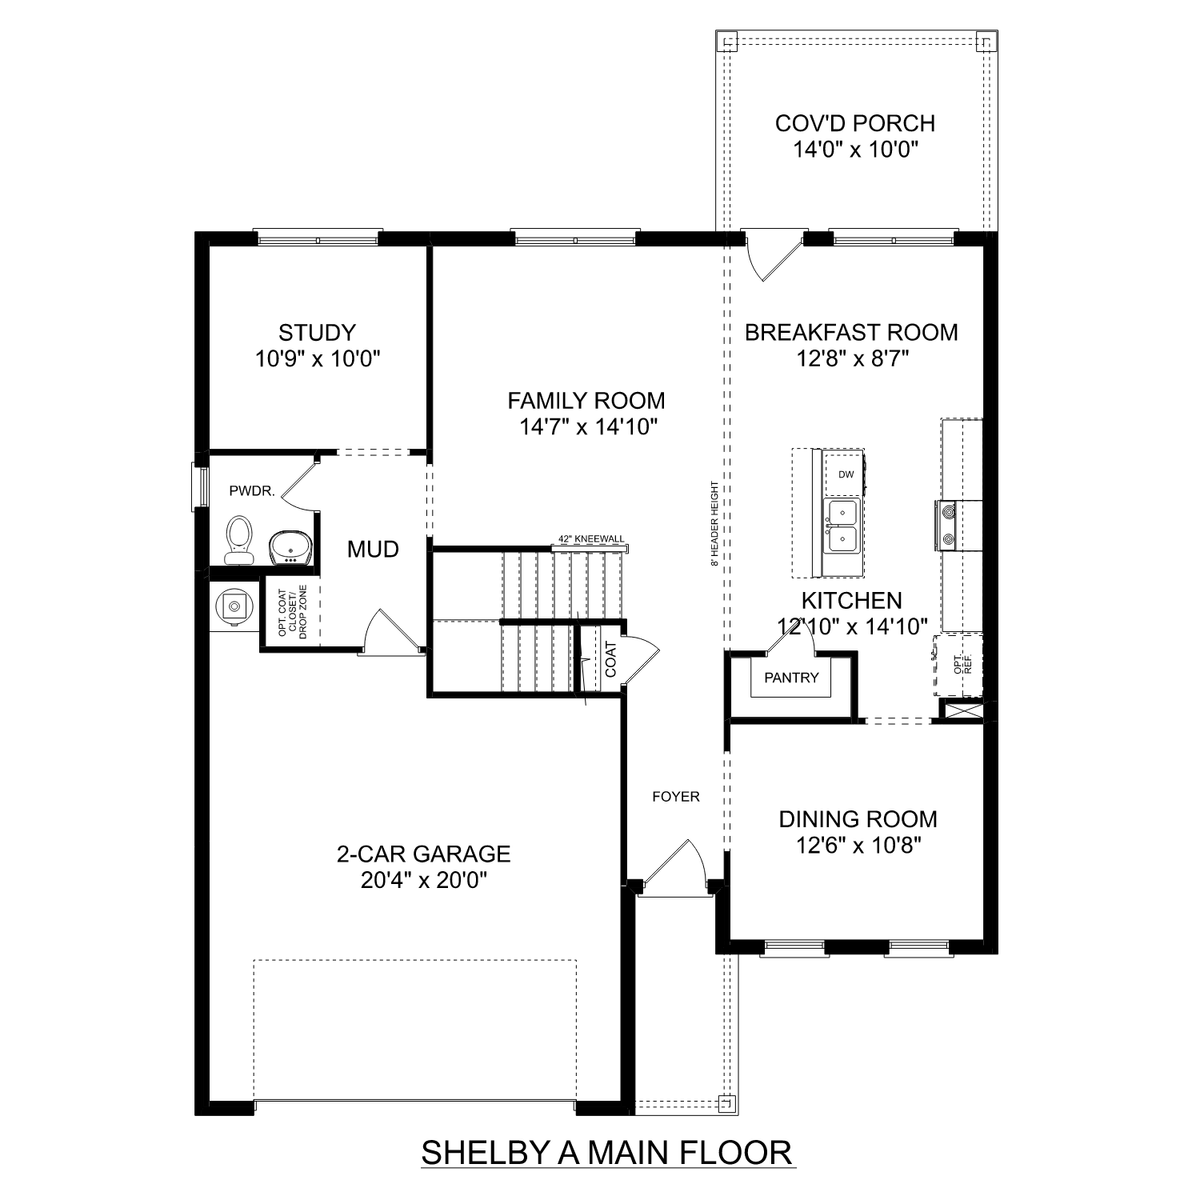 1 - The Shelby A buildable floor plan layout in Davidson Homes' Pavilion community.